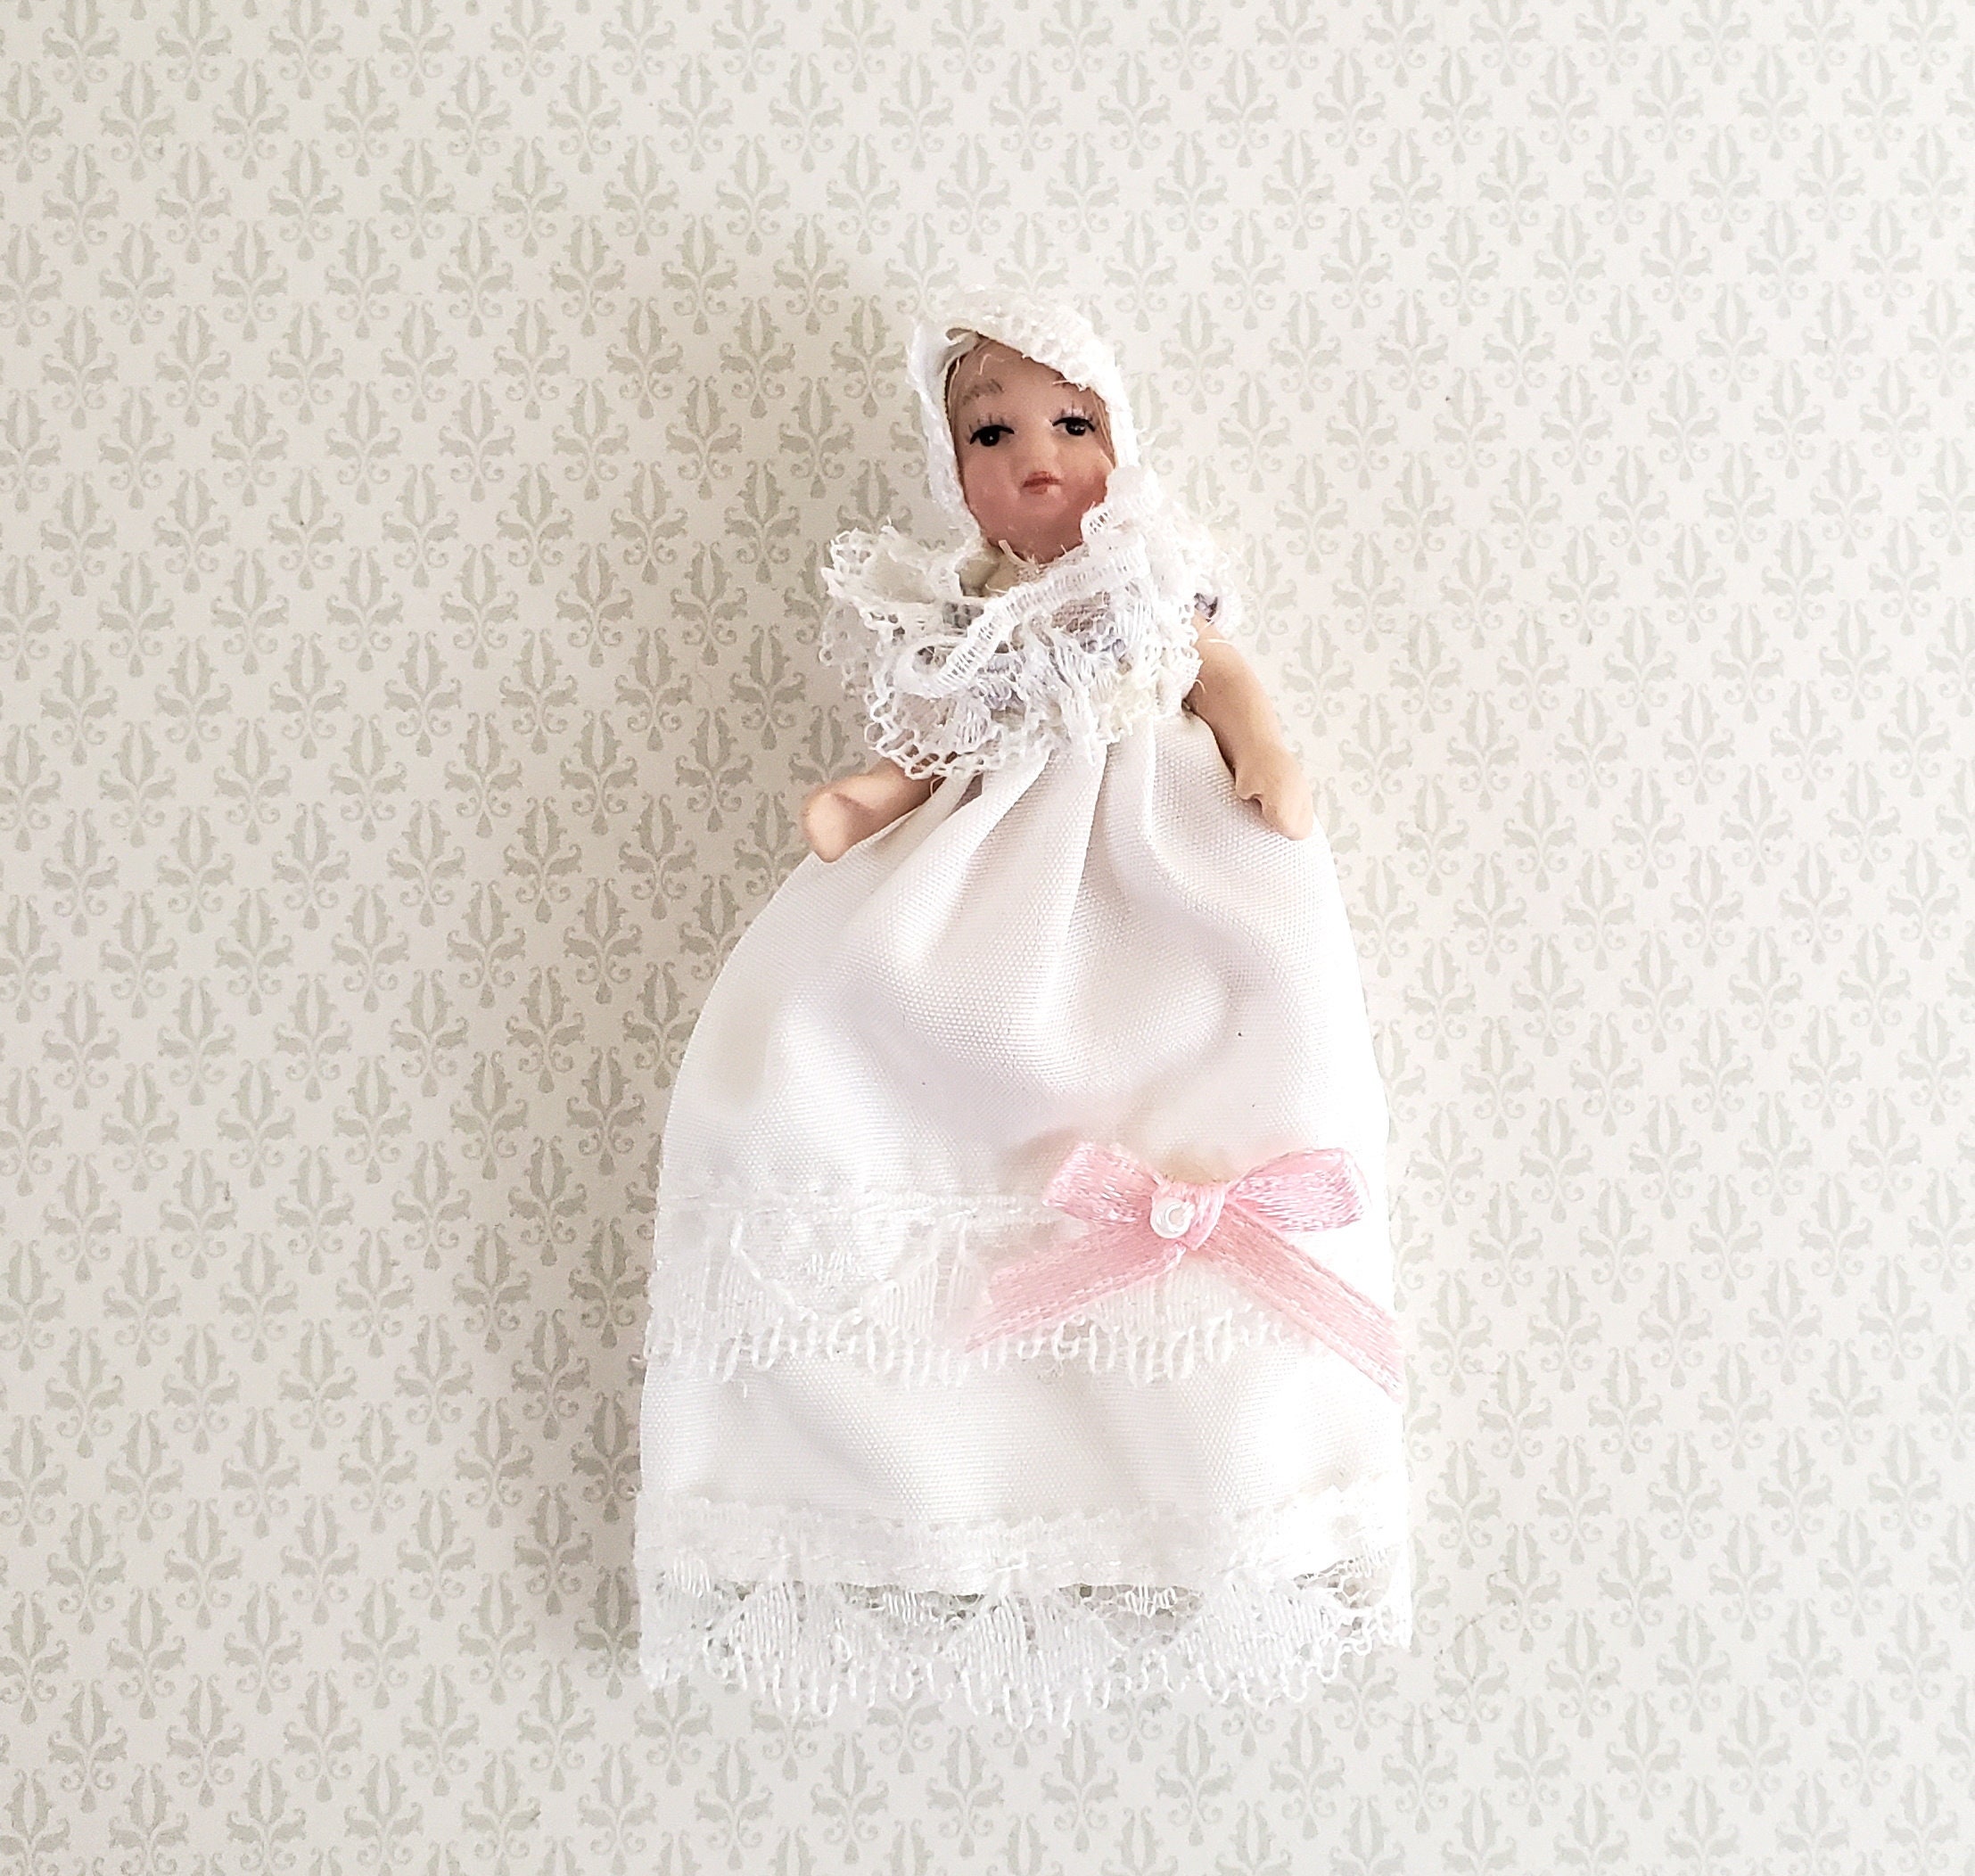 Dollhouse Baby Doll in Long White Gown Porcelain 1:12 Scale - Etsy